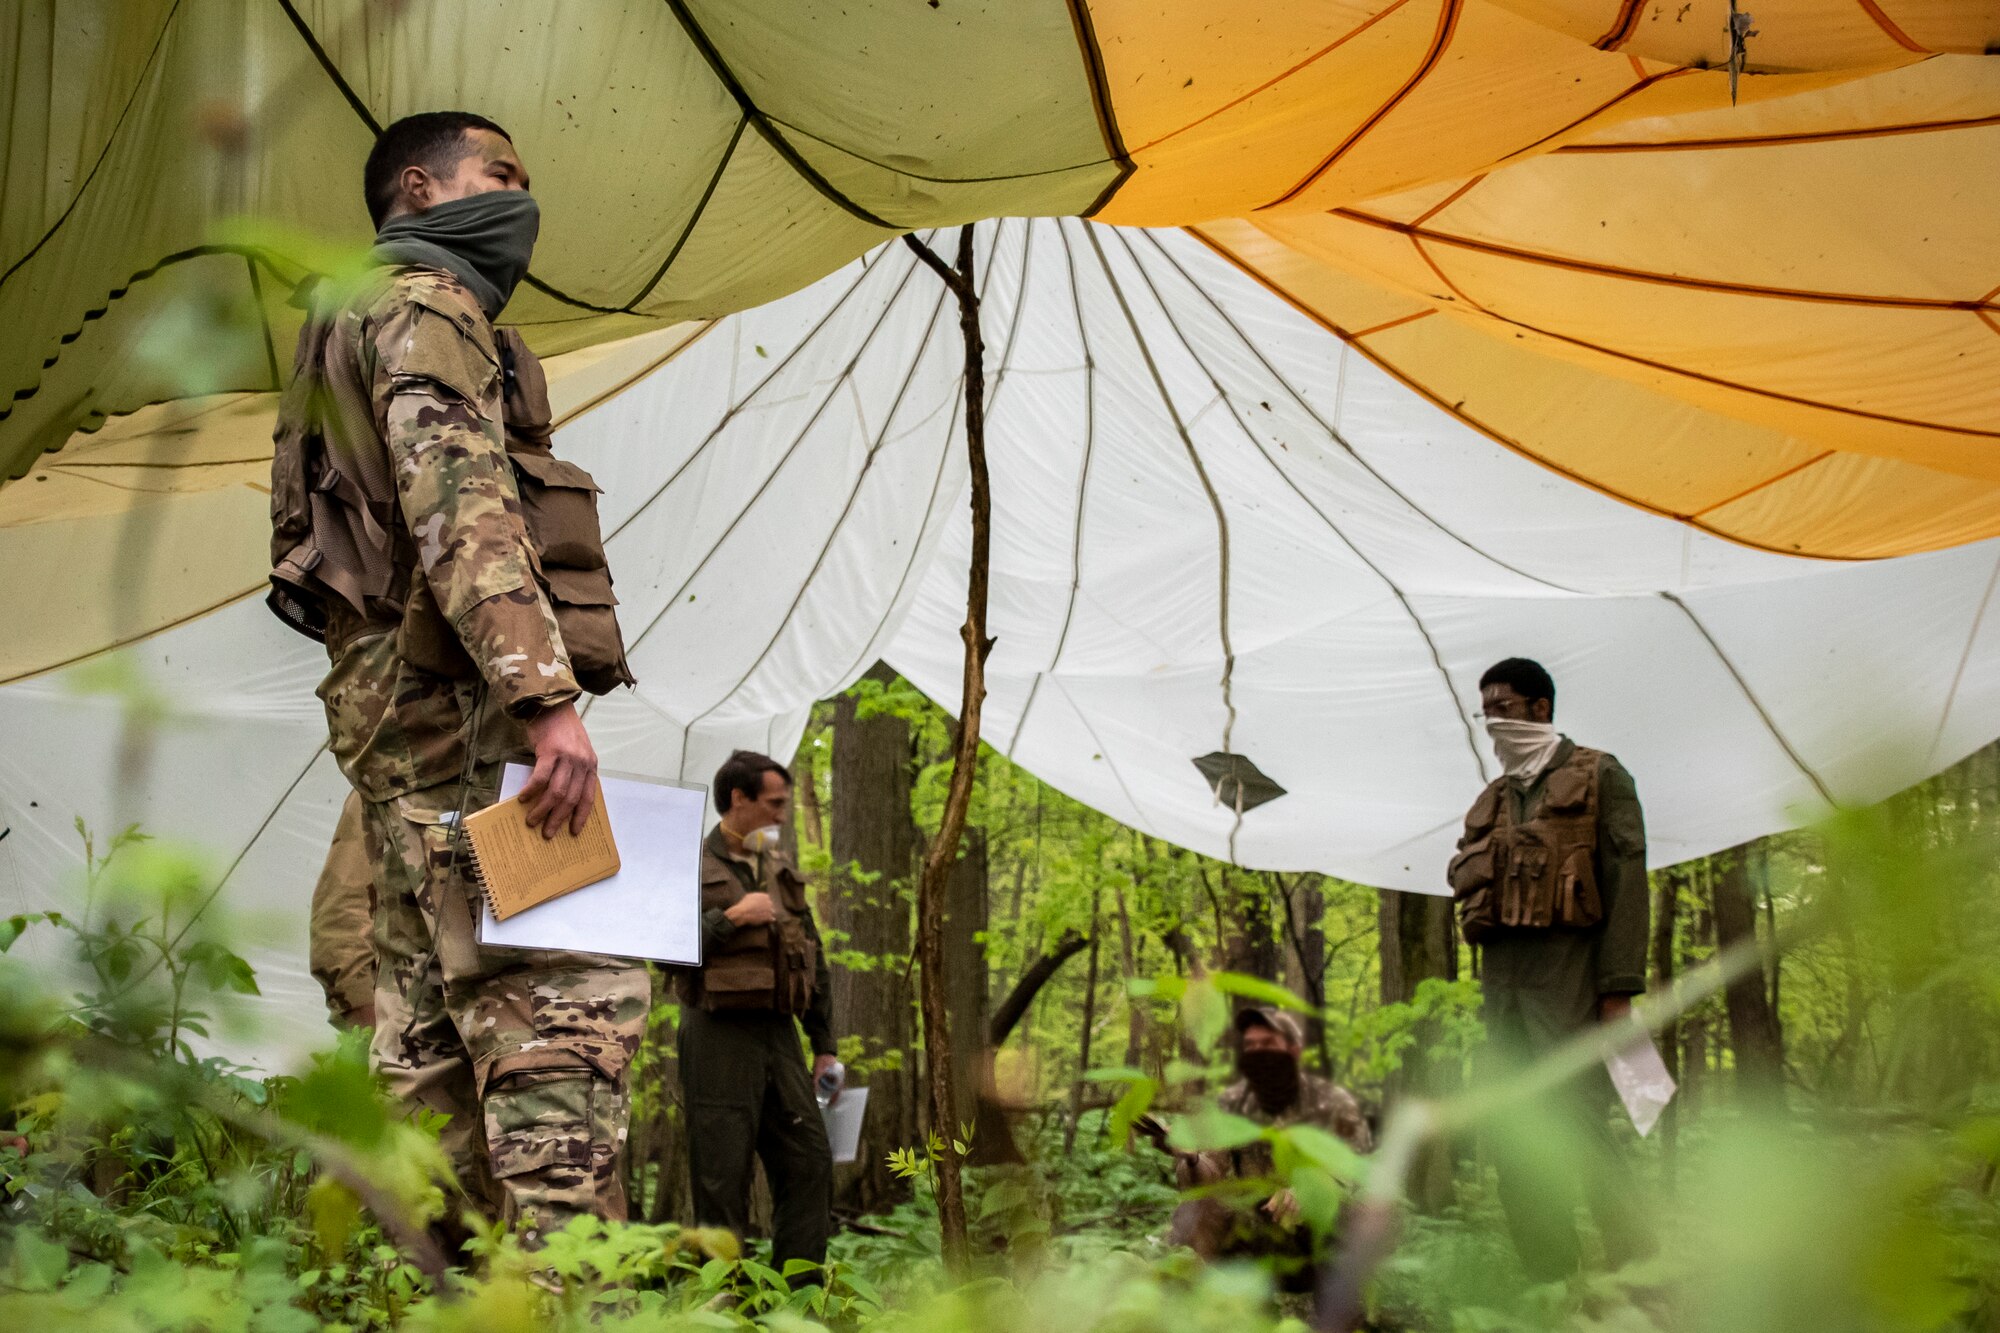 Aircrew from the 179th Airlift Wing Operations Group, Ohio National Guard, participate in combat survival training May 16, 2019, in Butler, Ohio. The 179th AW has made maintaining readiness while abiding by the COVID-19 safety precautions a priority throughout the COVID-19 Pandemic. (U.S. Air National Guard photo by Senior Airman Alexis Wade)